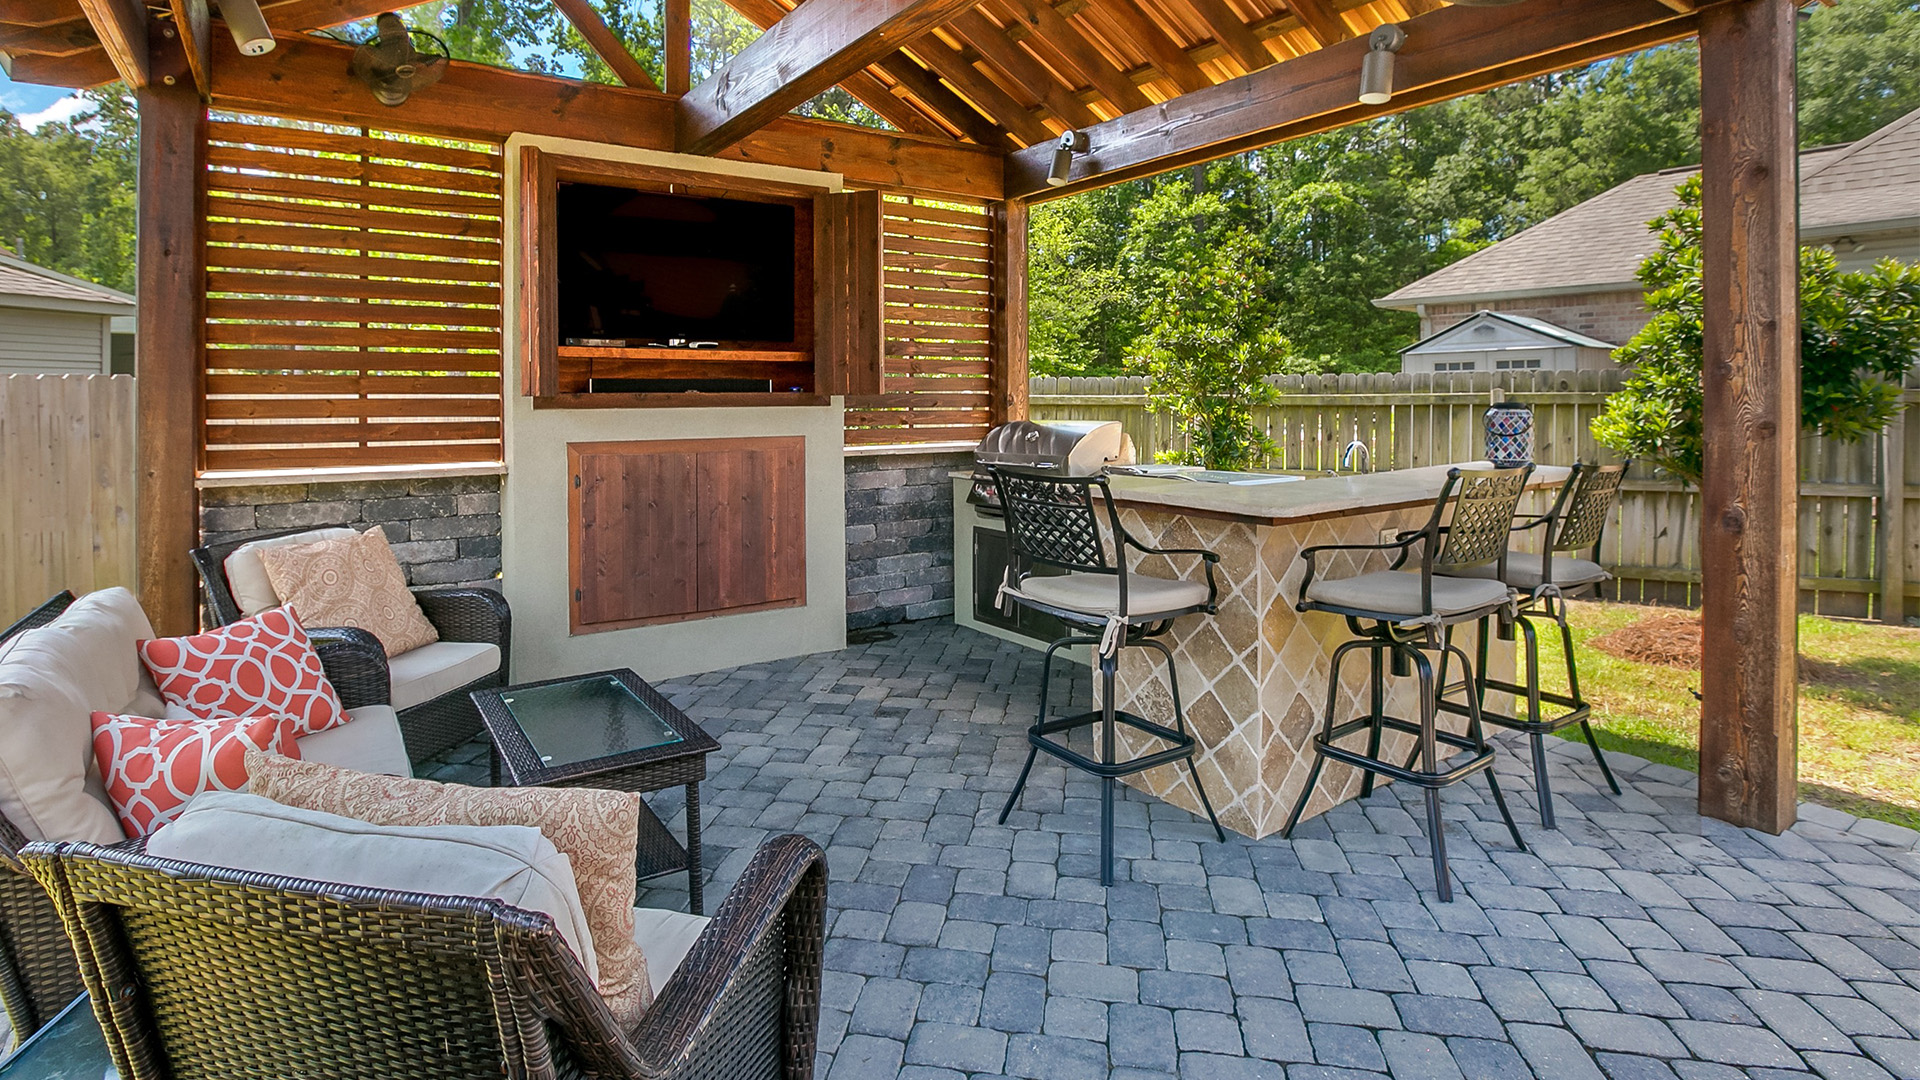 Custom Outdoor Concepts New Orleans Outdoor Living Space Designers